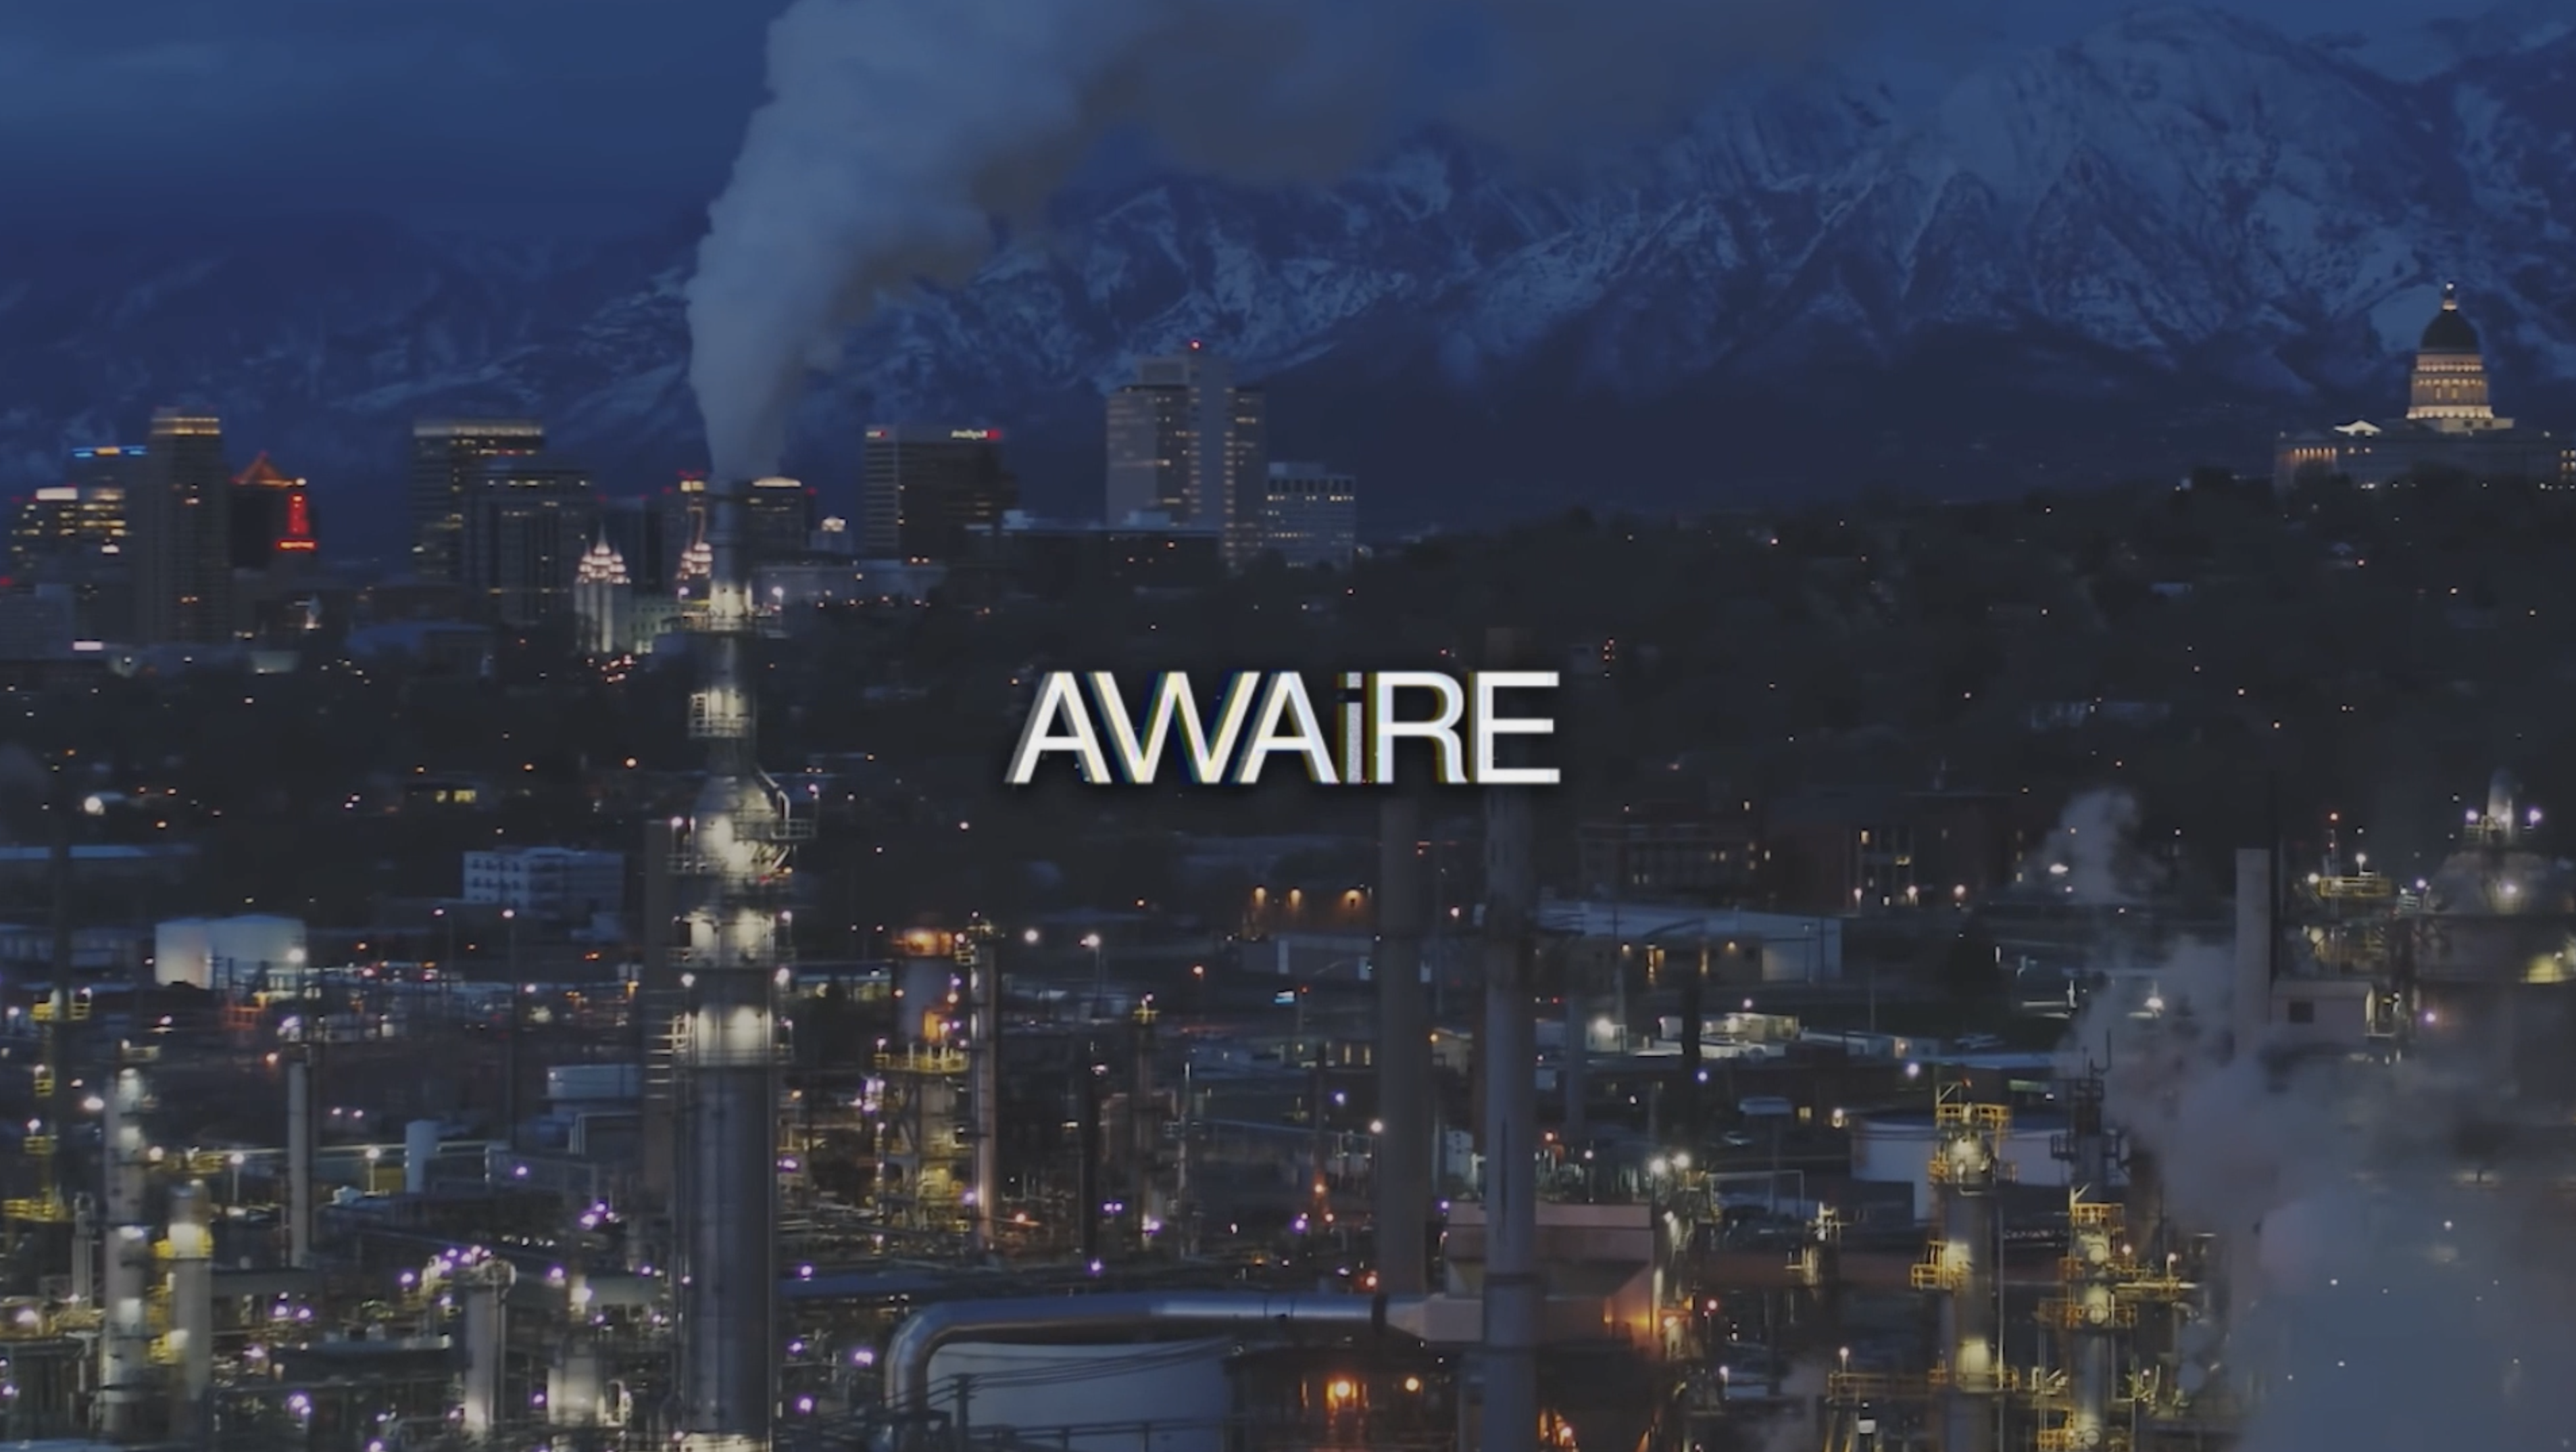 Reel image for AWAiRE